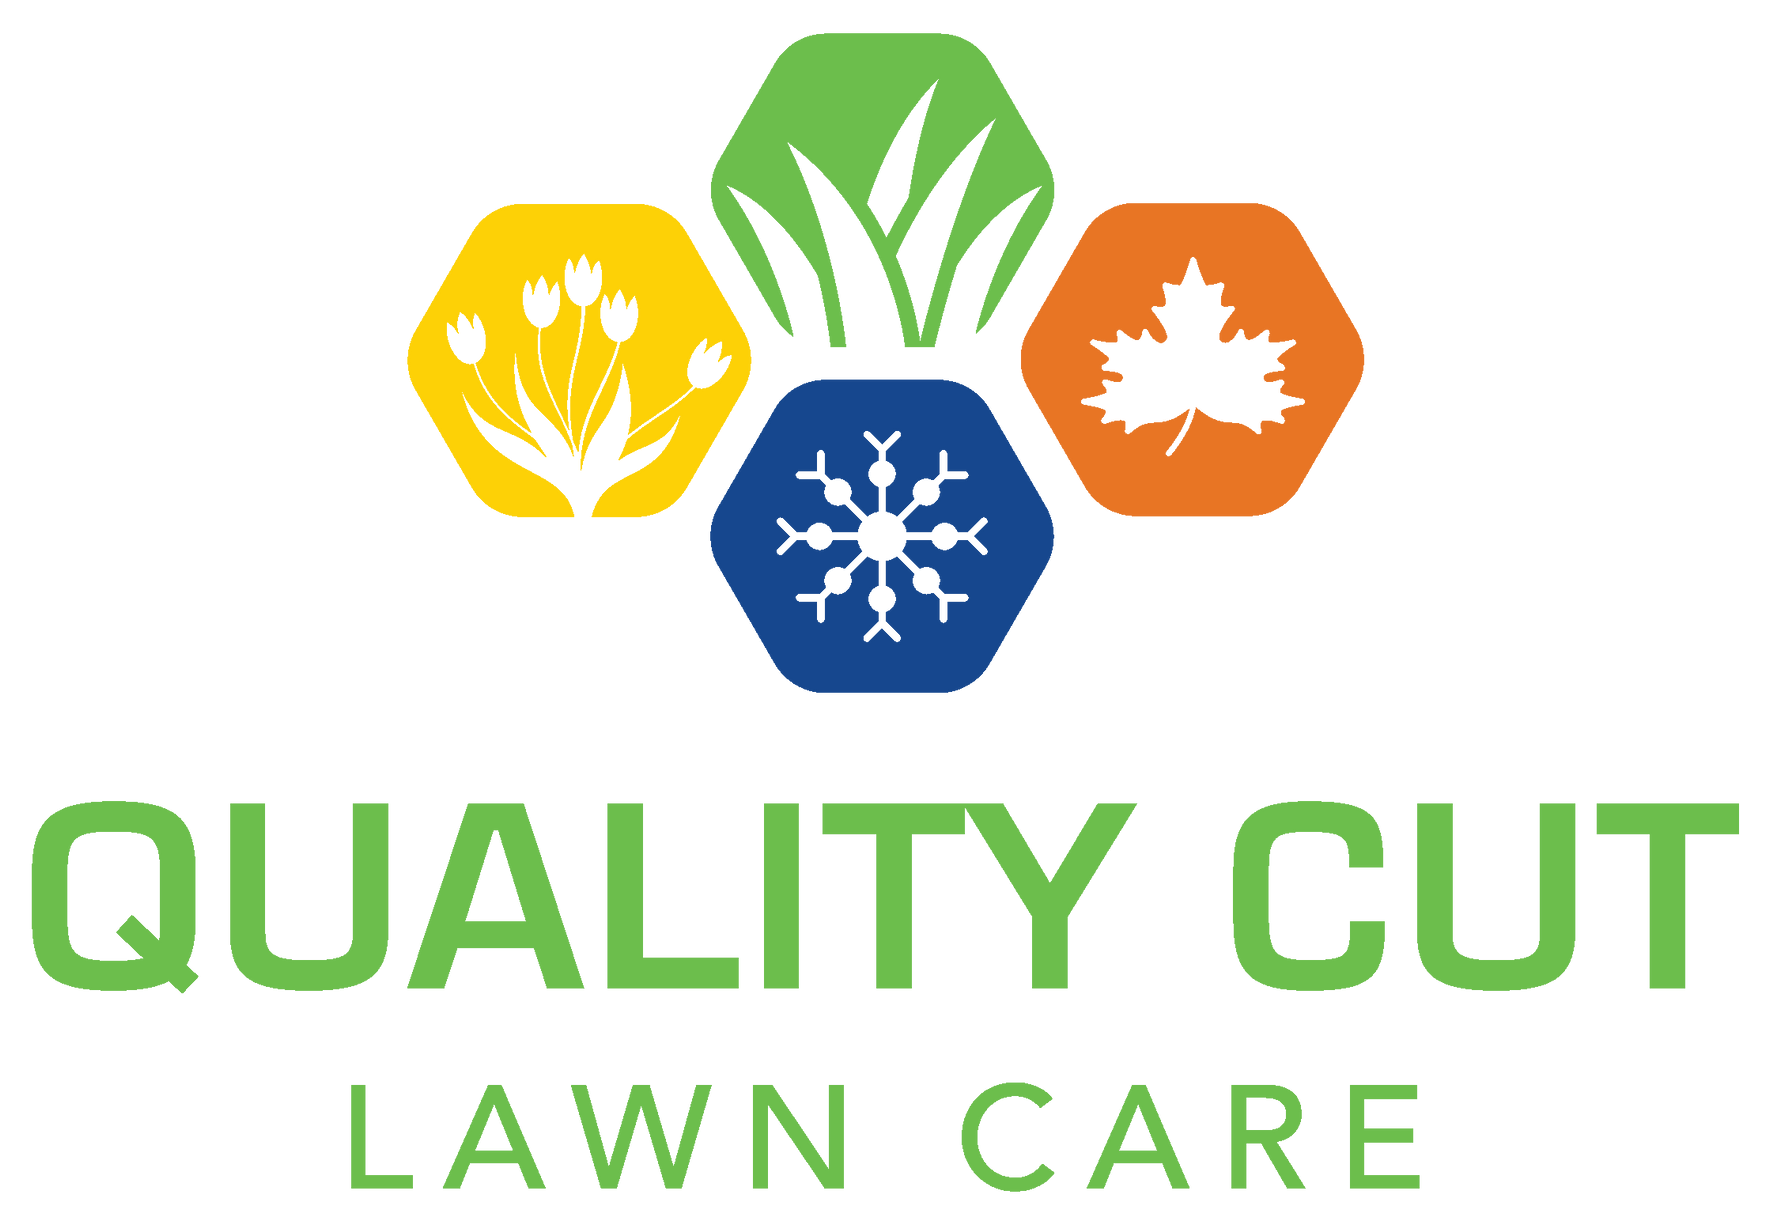 Quality Cut Lawn Care Logo. We Provide Lawn Care & Landscpaing Services in Columbia, MO.